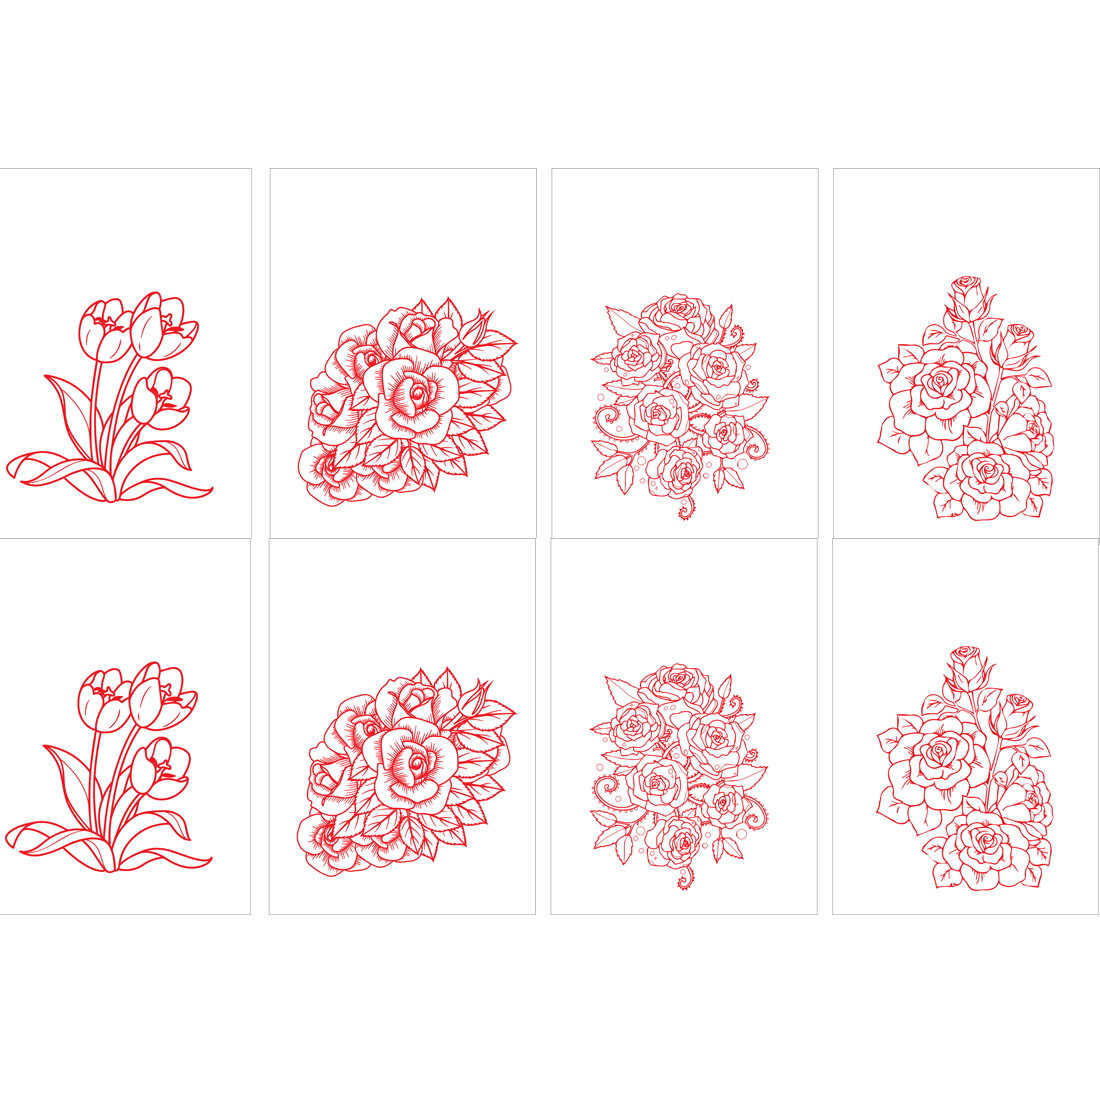 4 flower line drawings in red color suitable for drawing books, tattoos etc cover image.